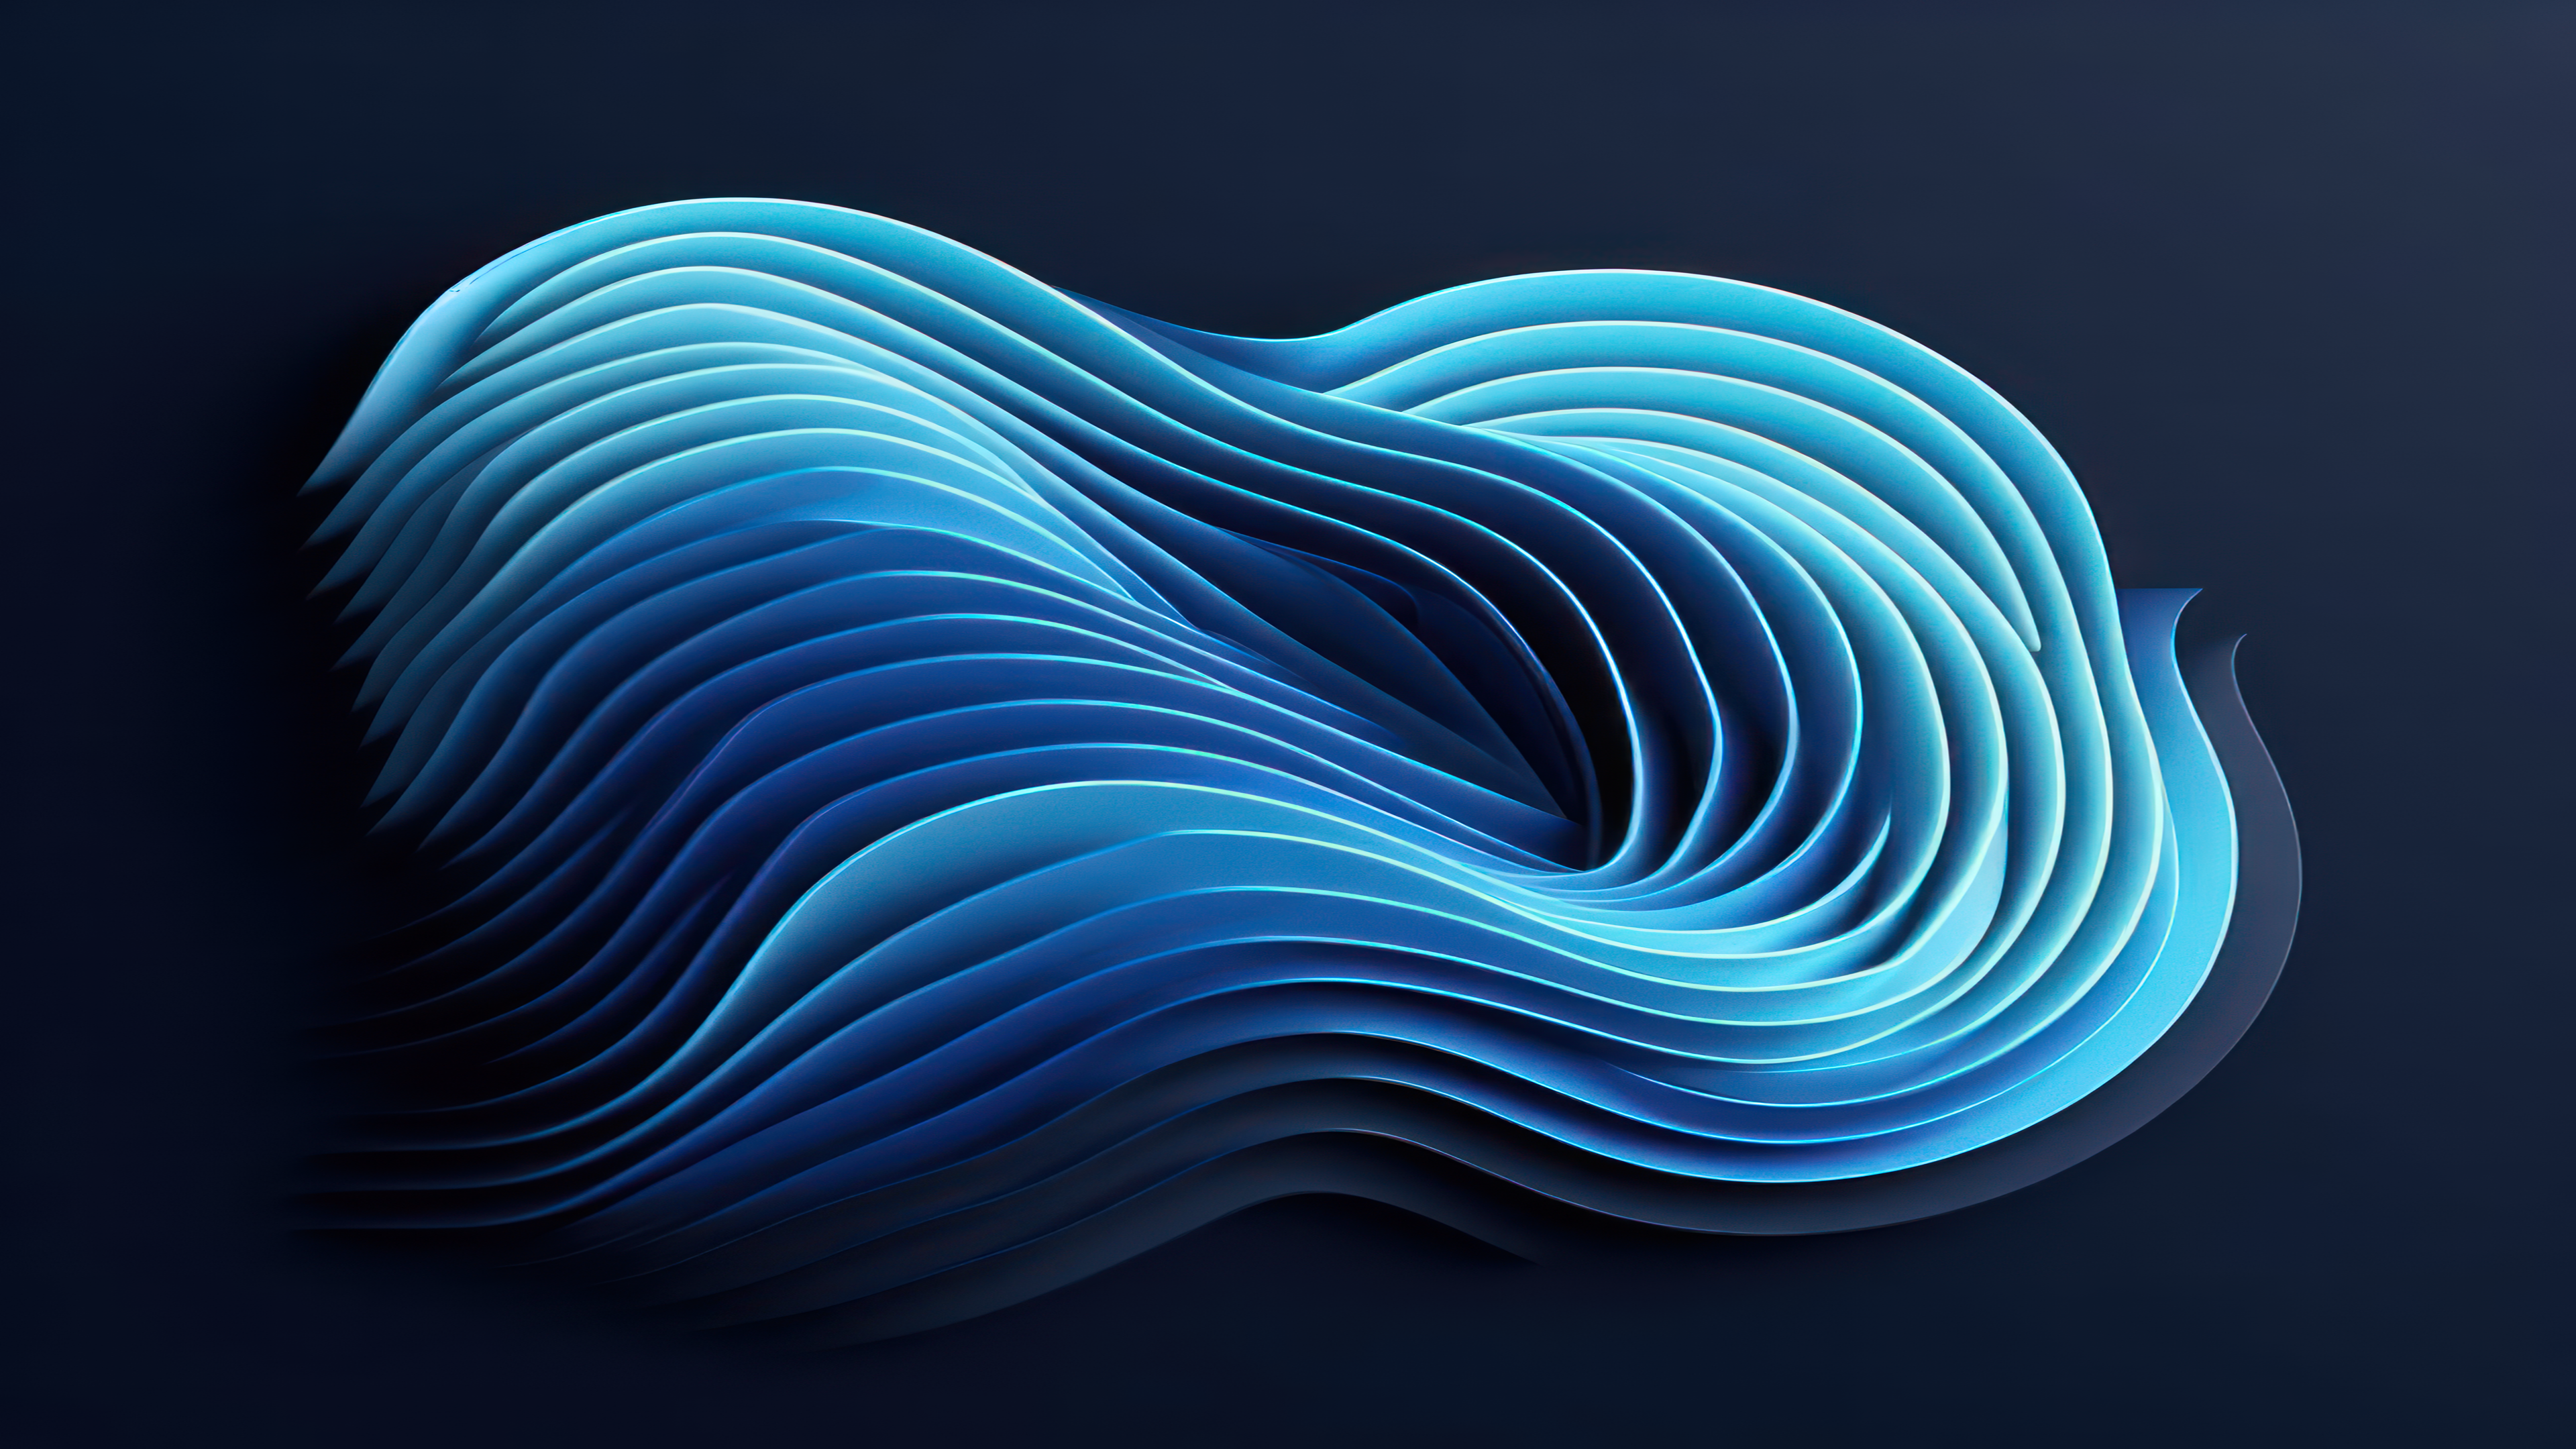 Windows 10 Windows 11 Blue Abstract Waves Simple Background 3840x2160